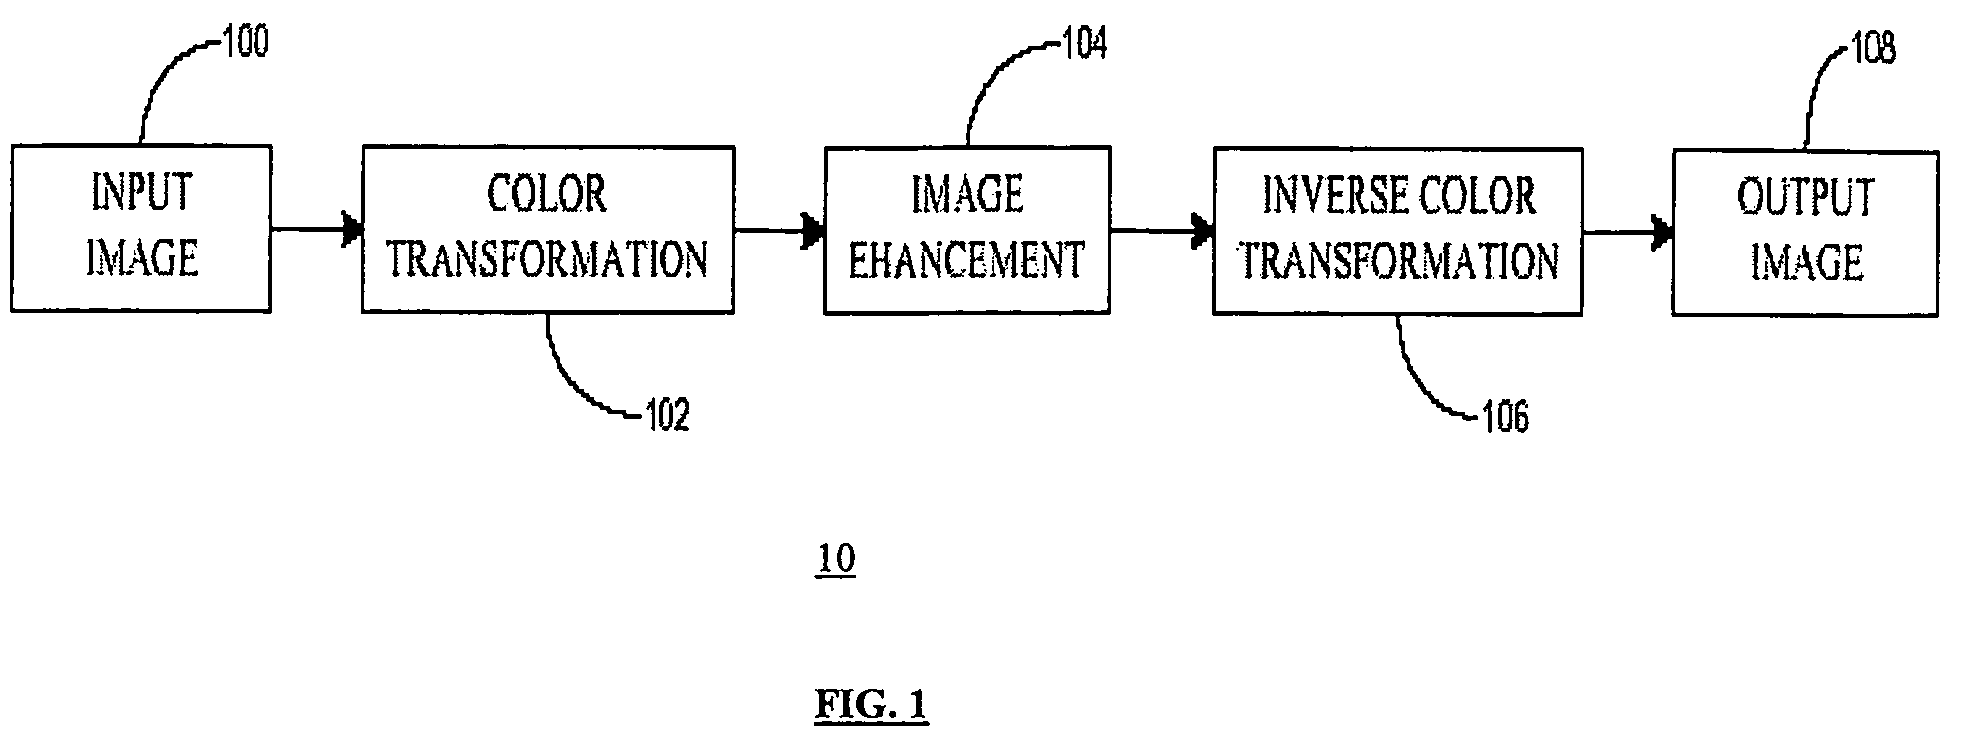 Method and apparatus for image processing based on a mapping function